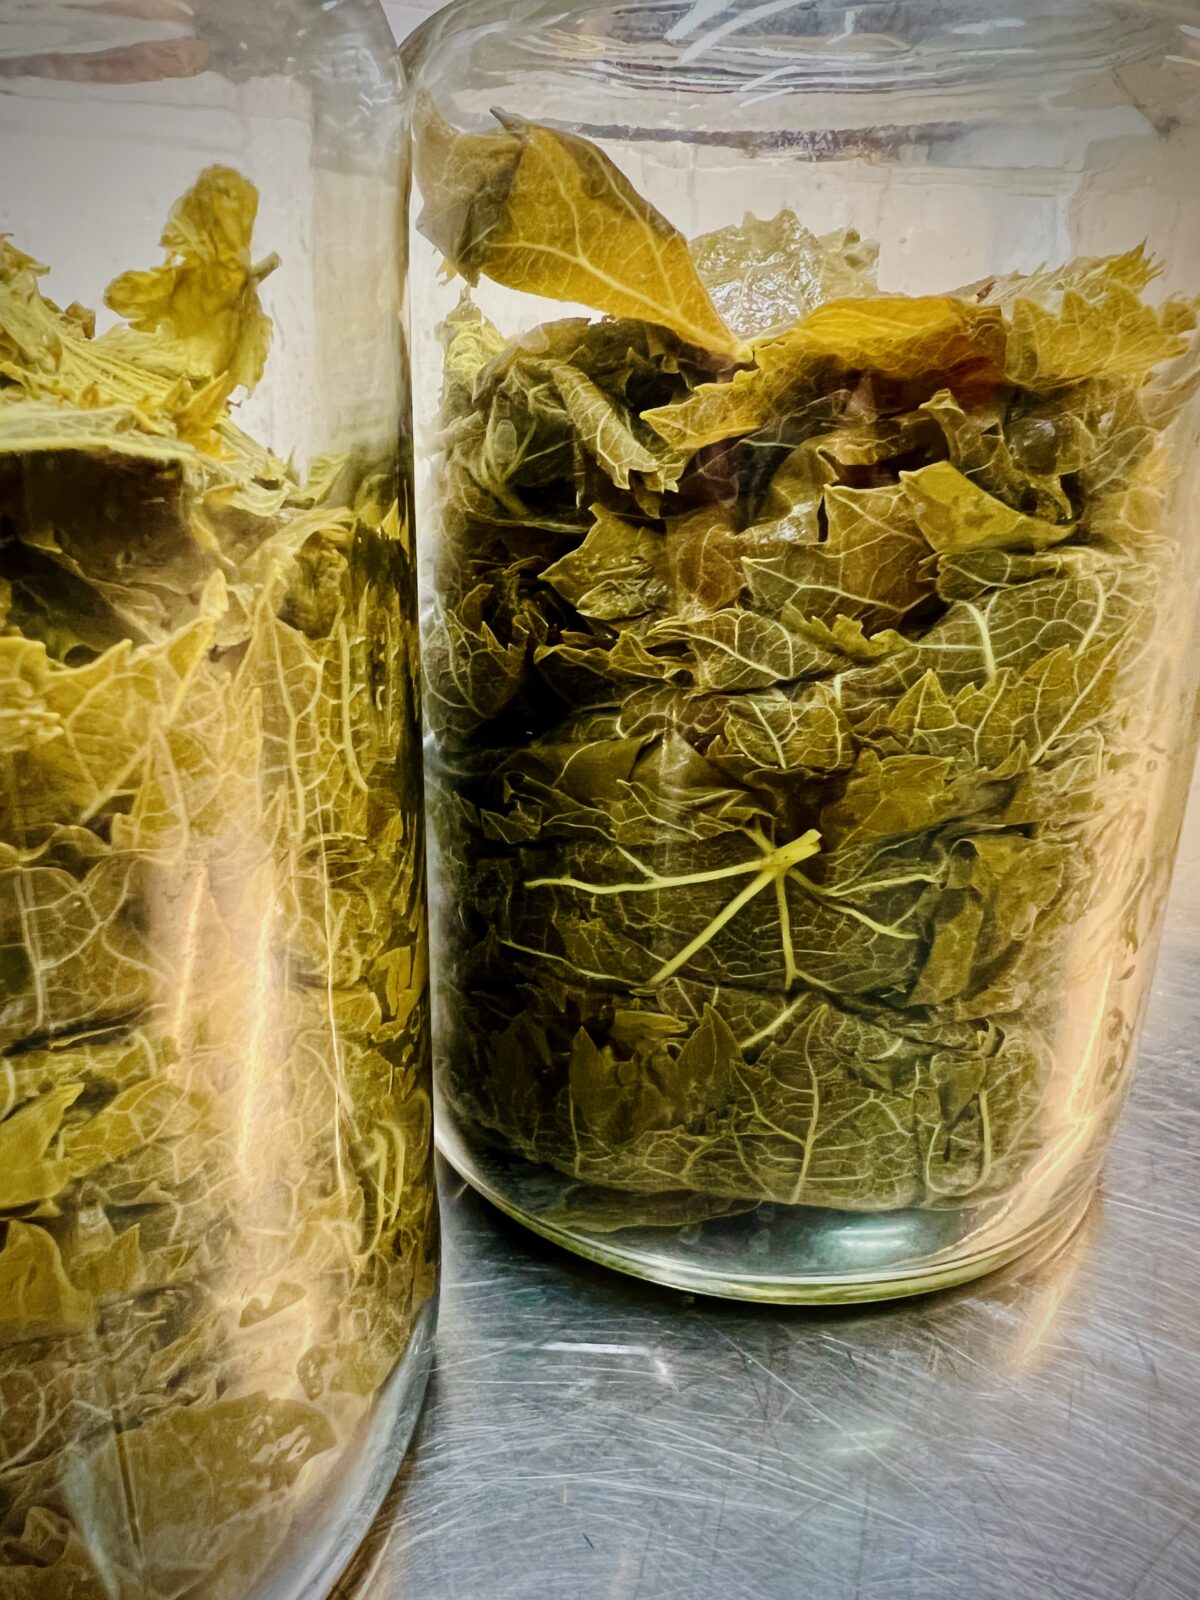 the blanched vine leaves are waiting to be doused with brine